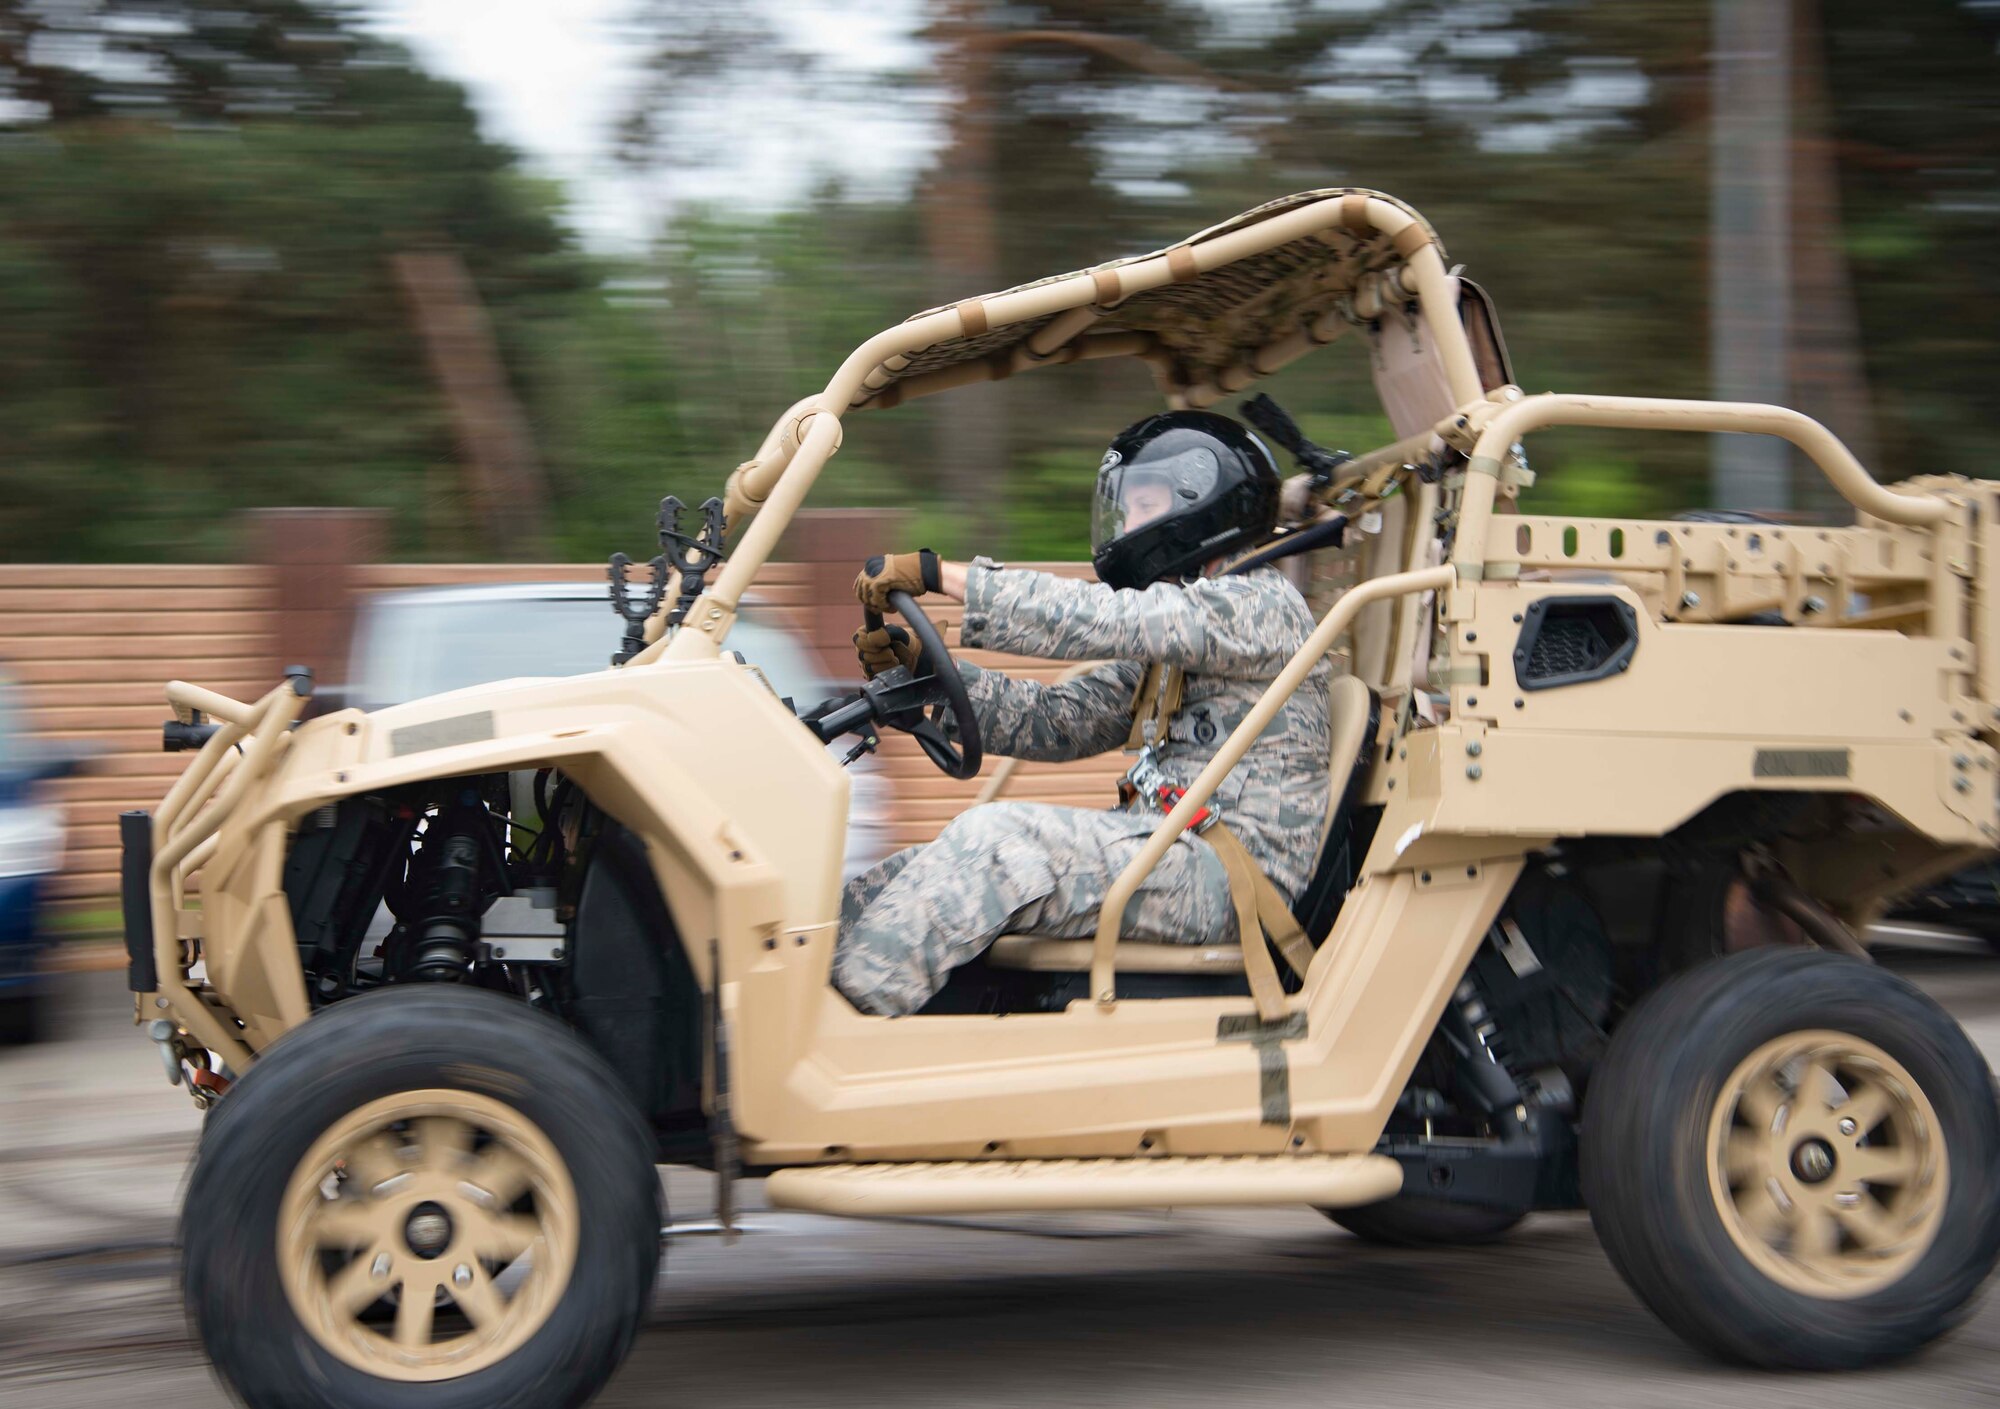 U.S. Air Force Senior Airman Ryan Daggett, 435th Security Forces Squadron contingency response team member, demonstrates the capabilities of a Razor all-terrain vehicle during Police Week 2018 on Ramstein Air Base, Germany, May 14, 2018. Eight law enforcement units invited the Kaiserslautern Military Community to experience various aspects of their professions, such as a military working dog demonstration, a simulated vehicle pursuit, and a weapons display. (U.S. Air Force photo by Senior Airman Elizabeth Baker)